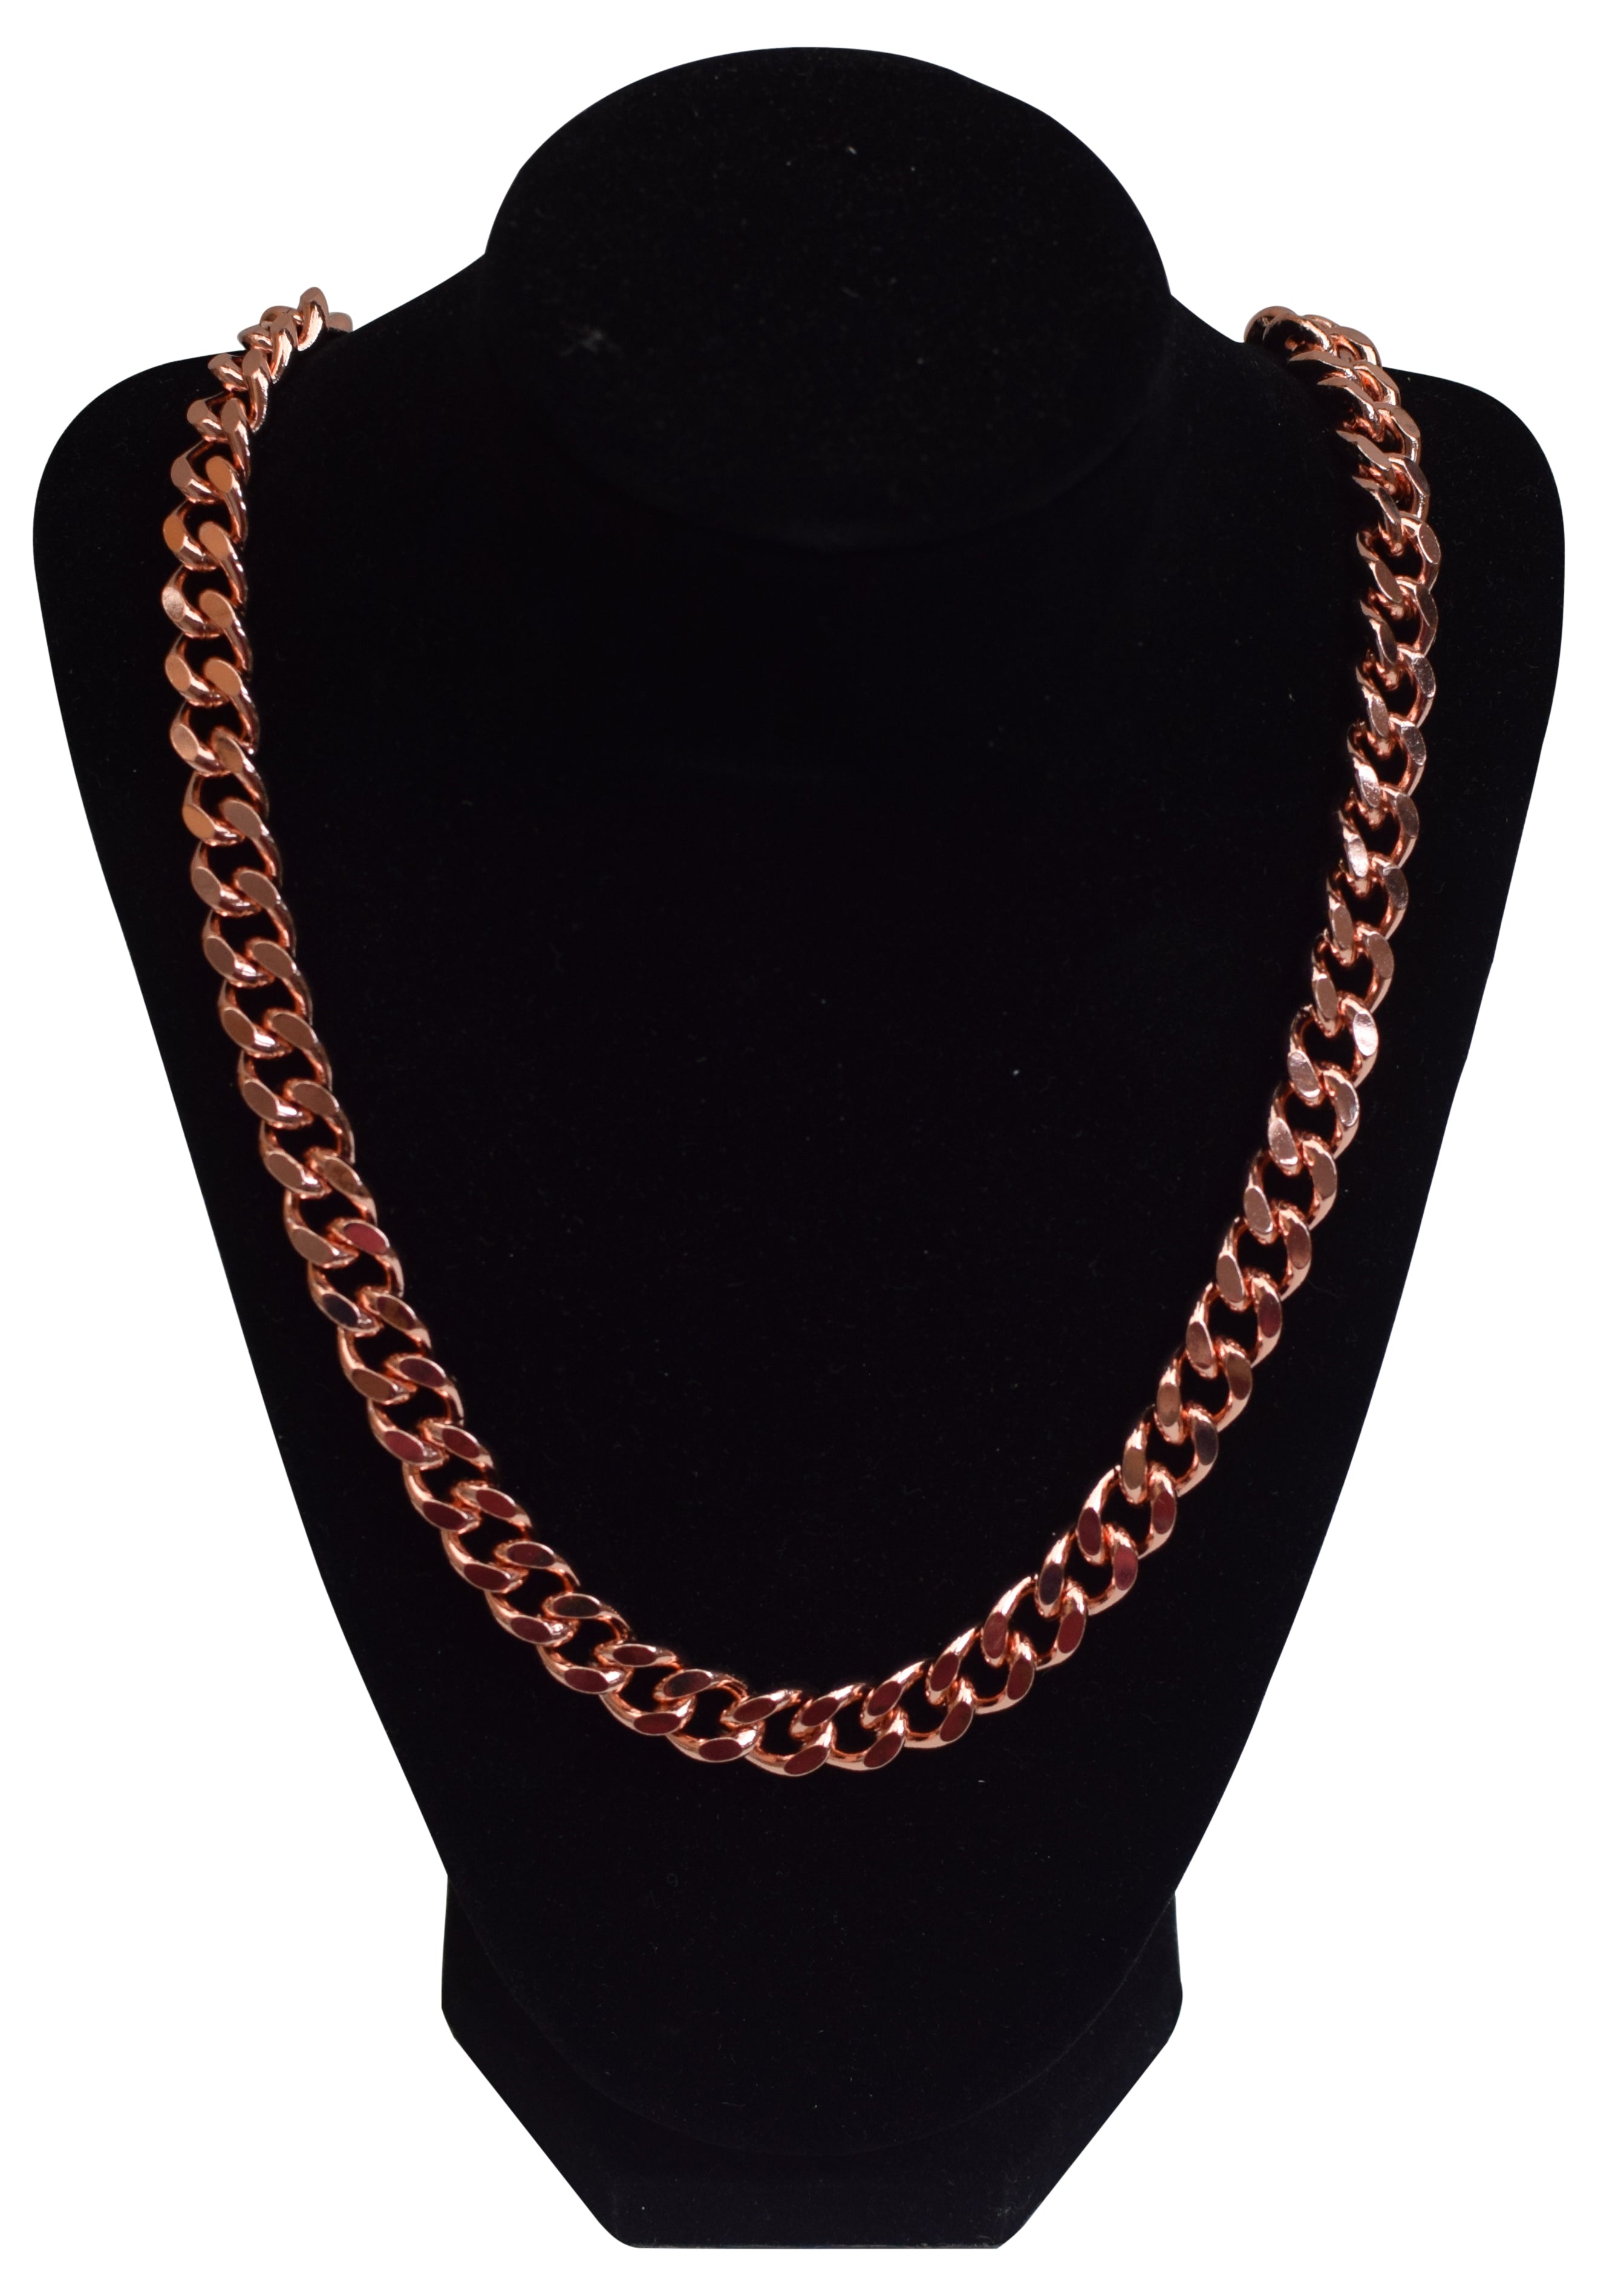 Marshal Solid Copper Heavy Mens Chain Link 24 inch Necklace